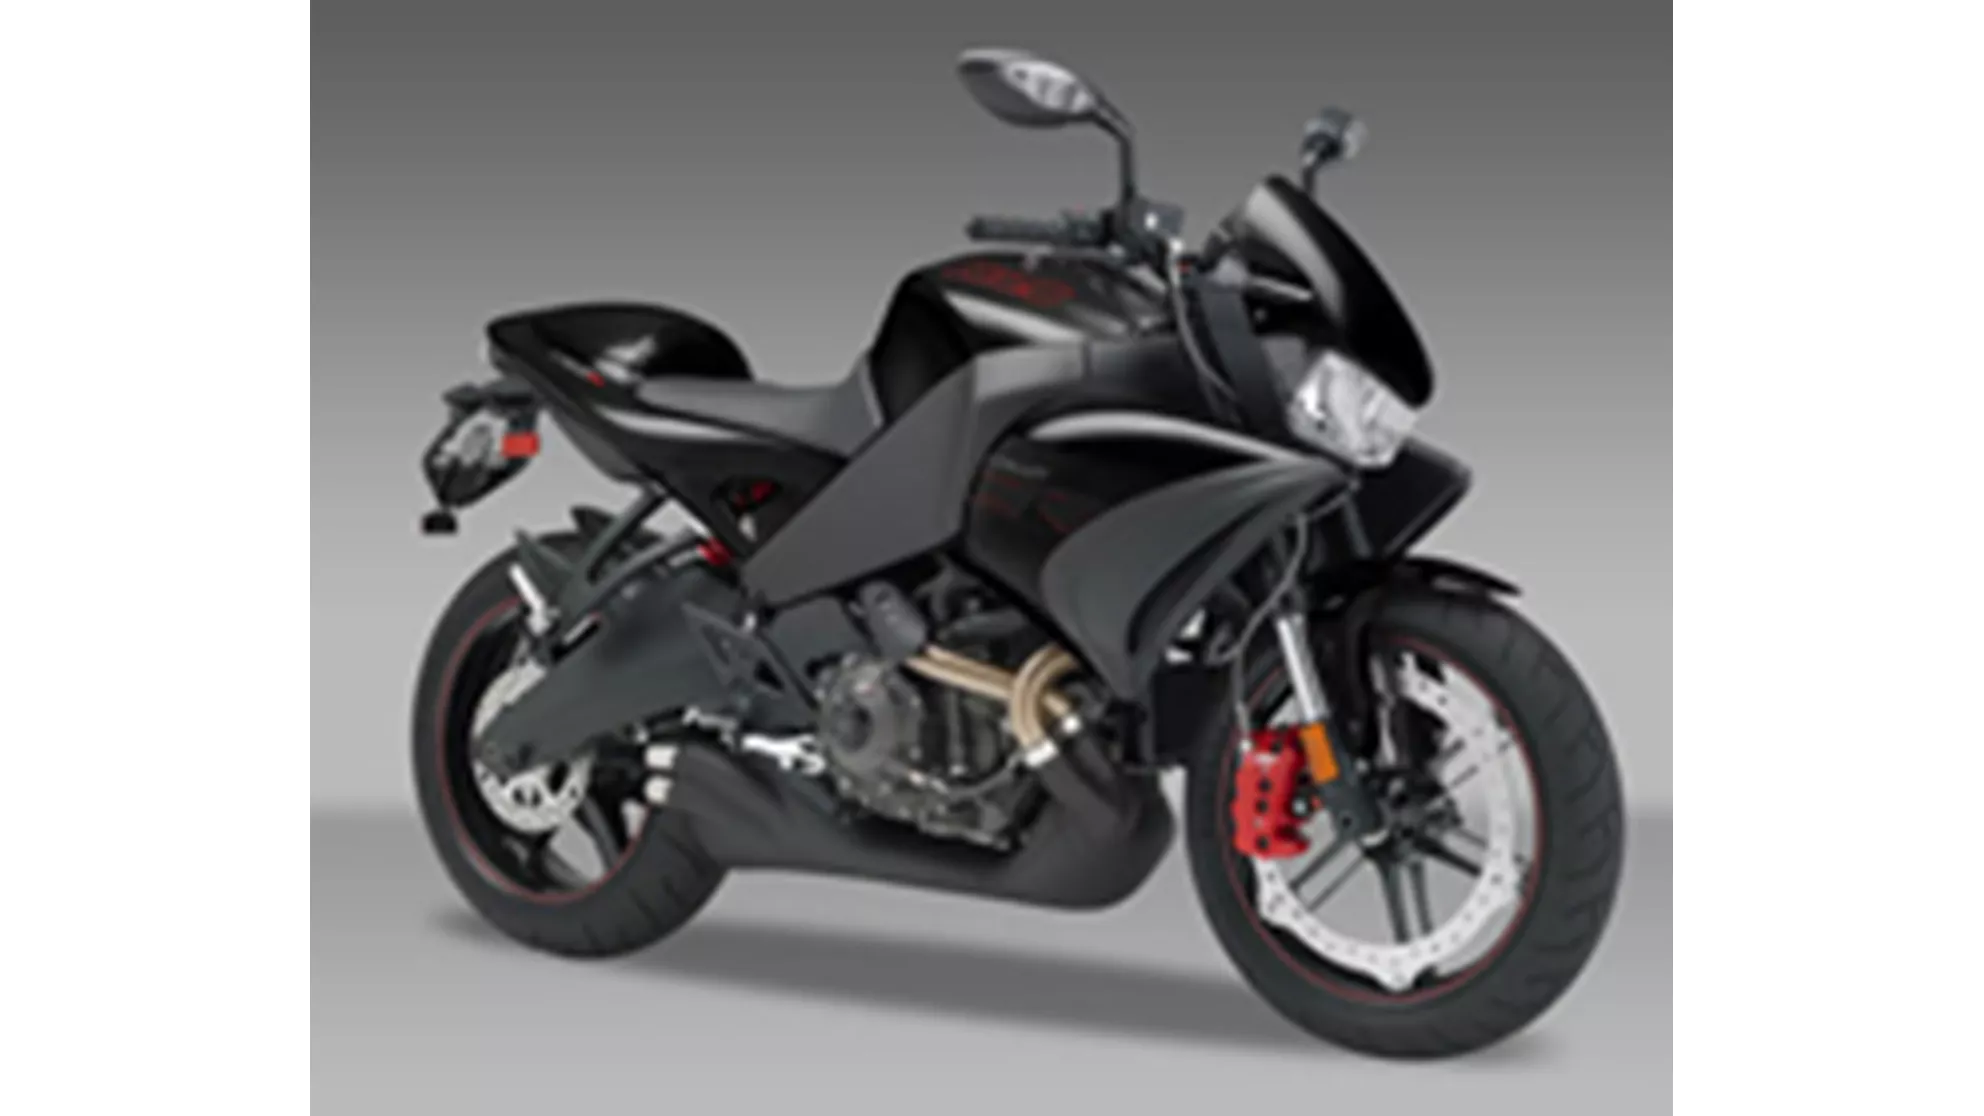 Buell 1125 CR - Image 2